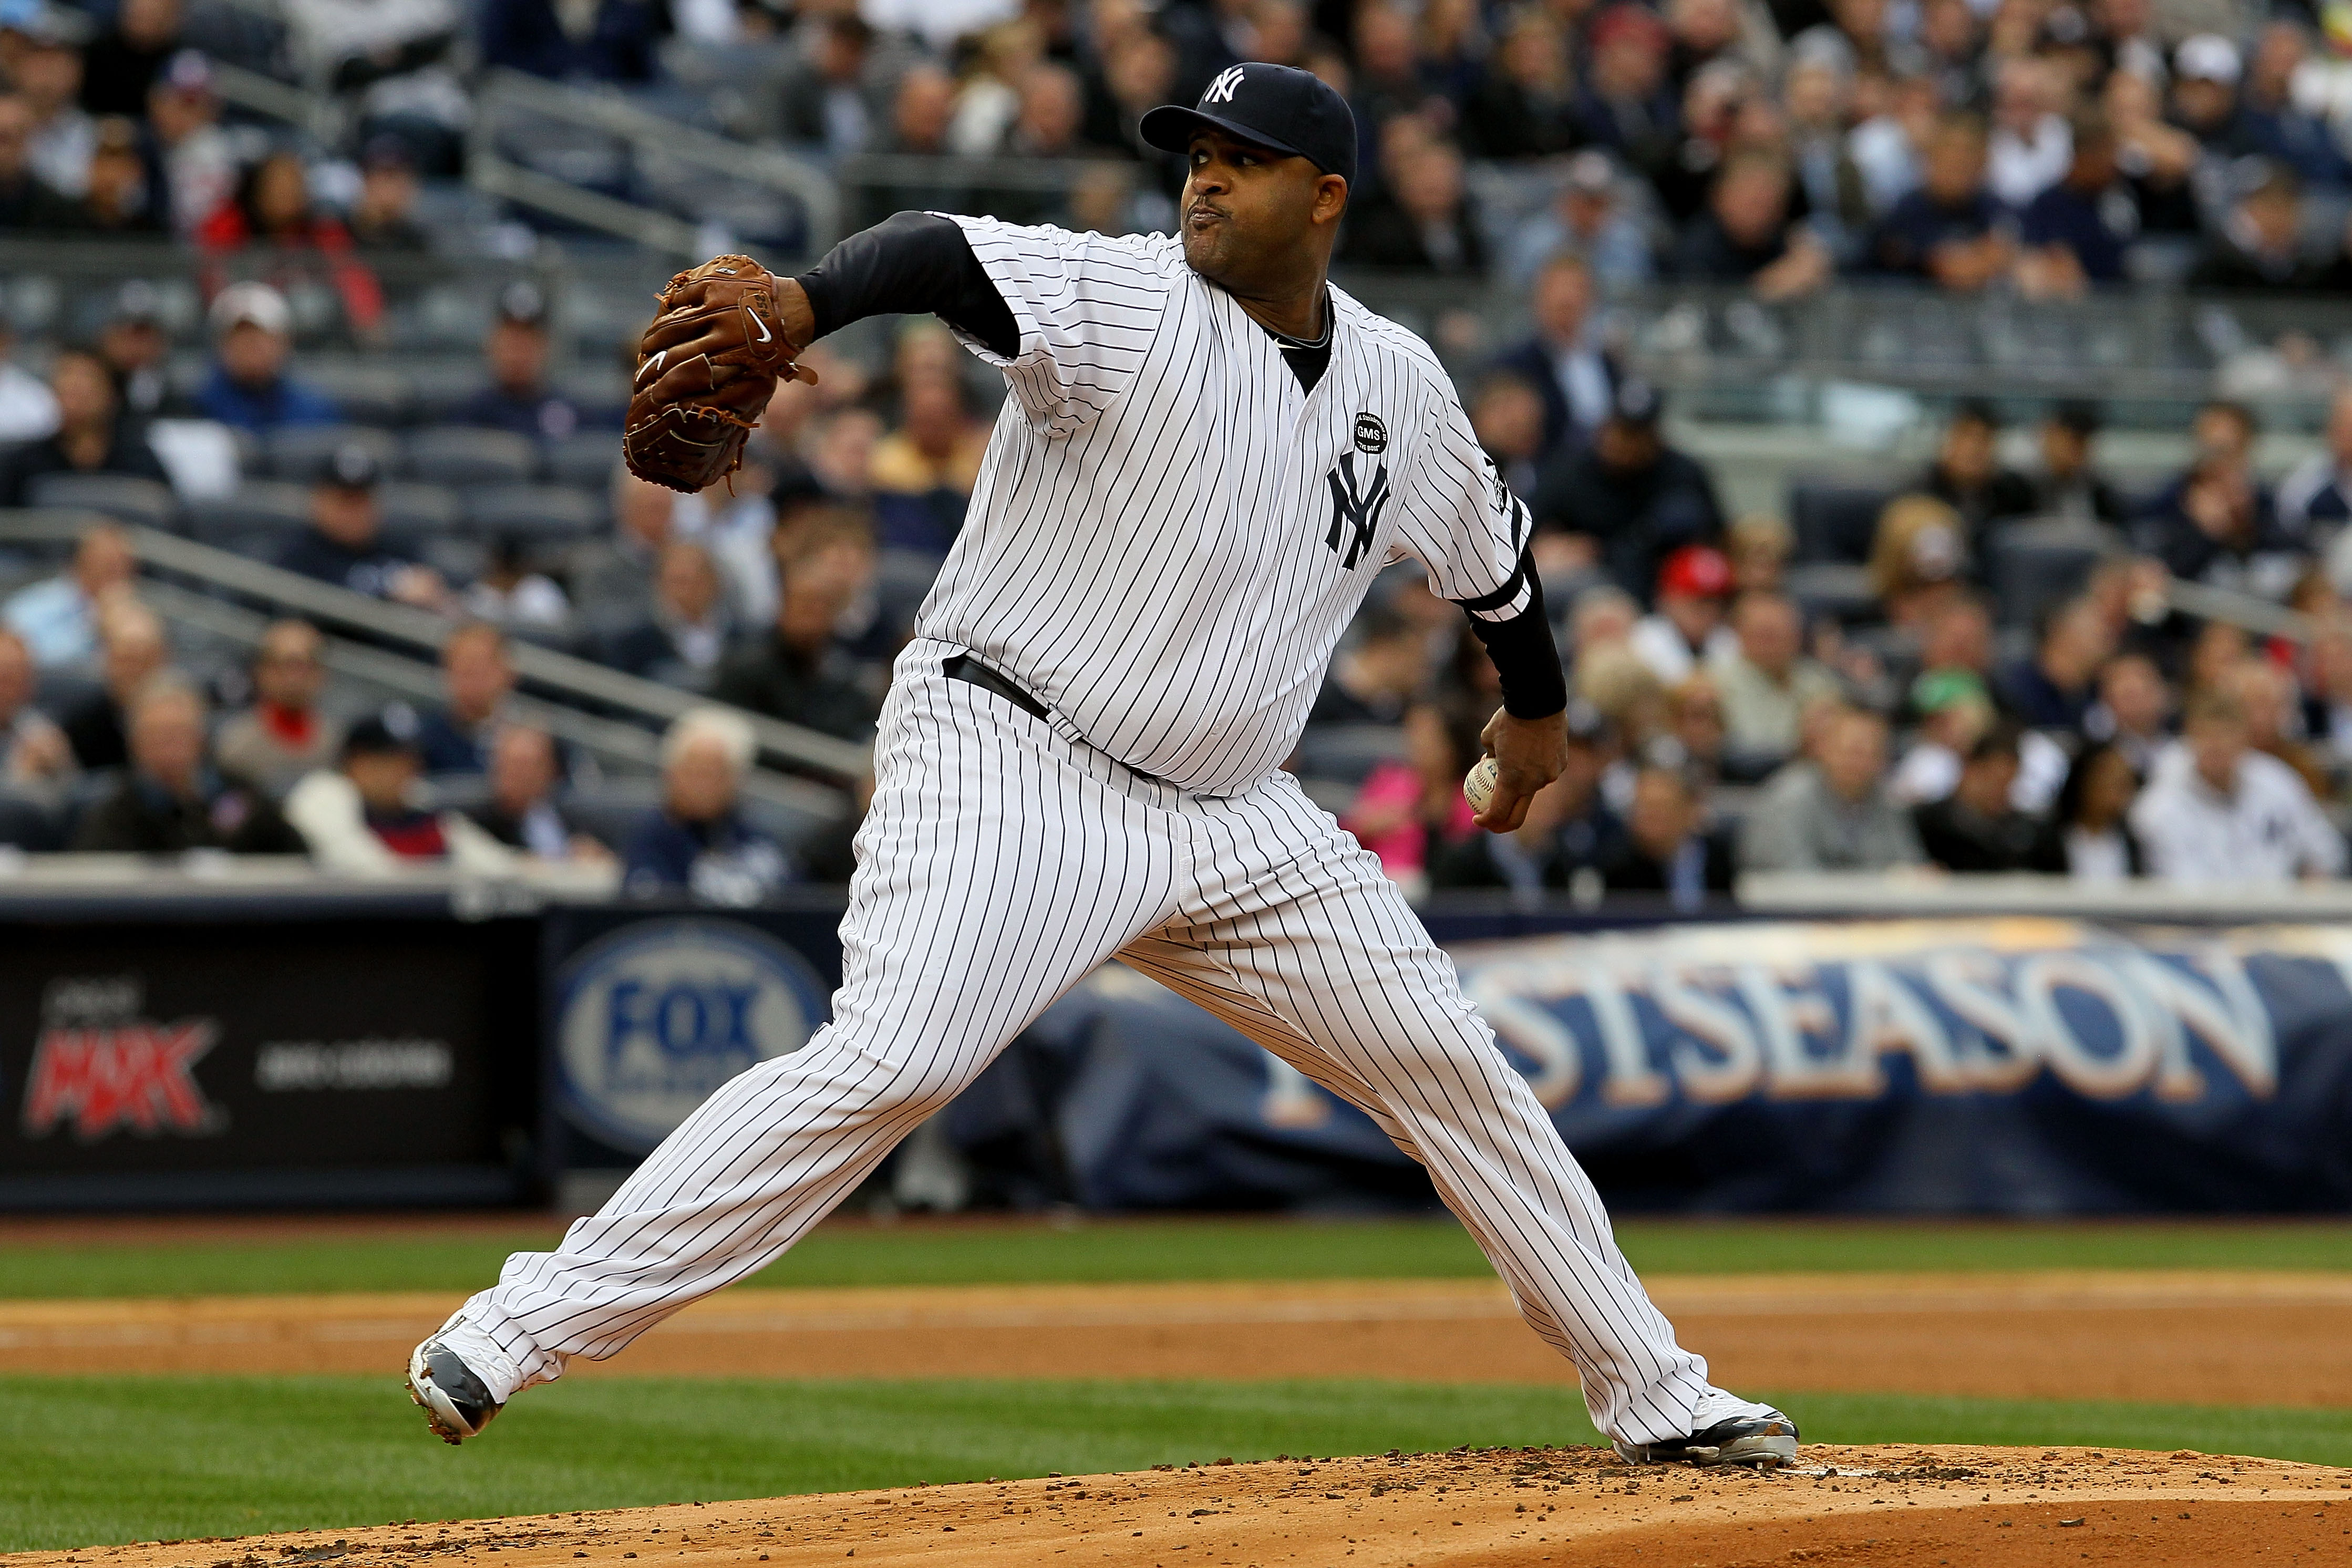 Tipping the Scale: The Top 10 Most Overweight MLB Players